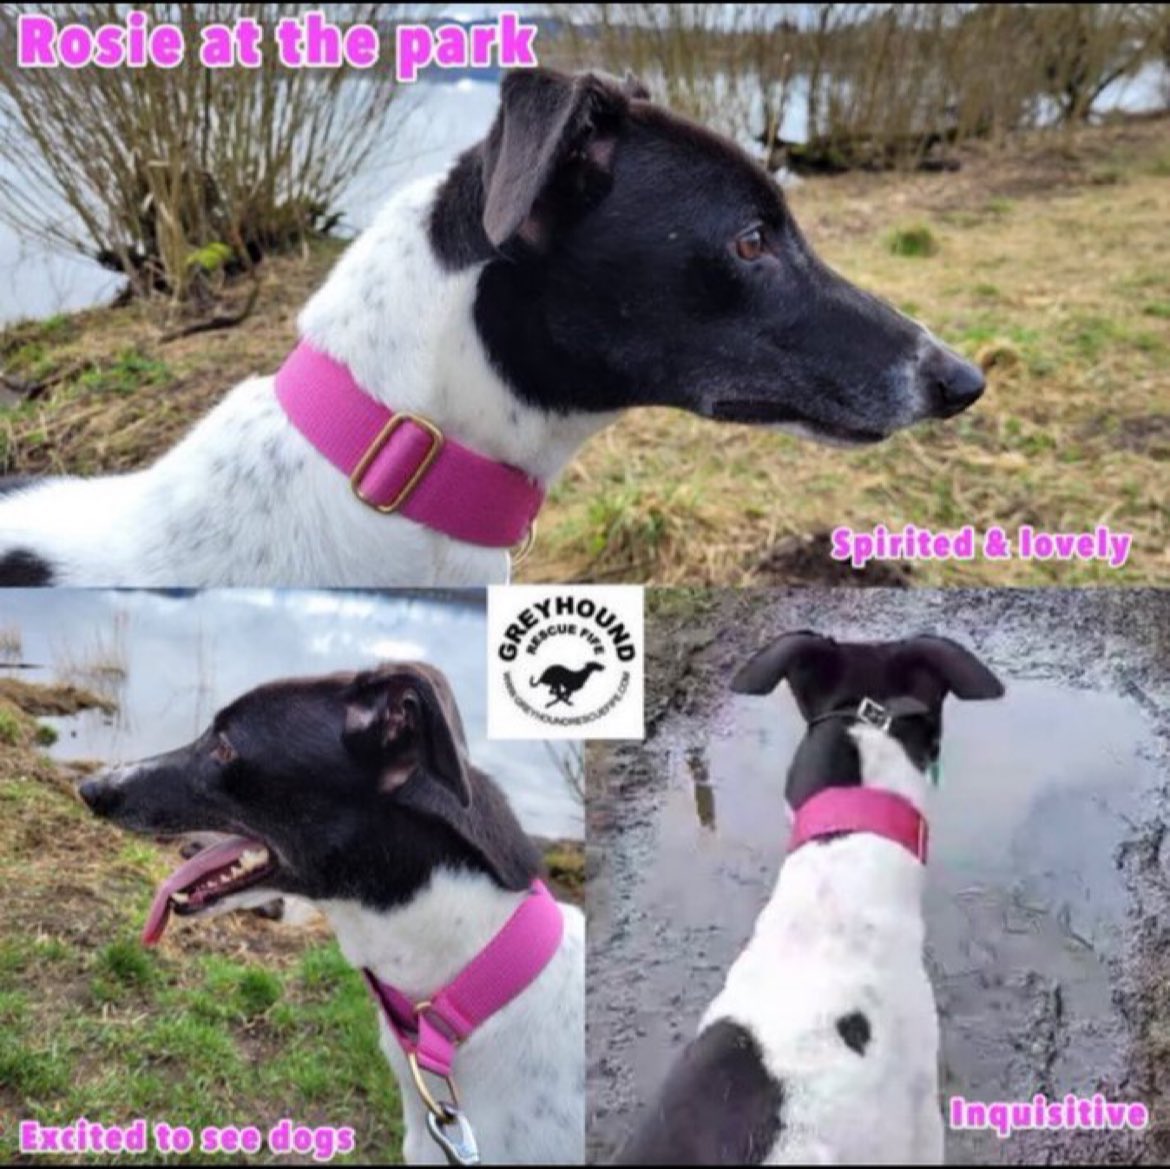 Rosie(2)is the sweetest bundle of fun.A beauty with a smooth, white & blk coat.She’s friendly, alert on walks, & can be bouncy (a wabbit spotter). She walks well with hounds & shares well with Spike. At the park she was excited to see other dogs. #AdoptDontShop #rehomehour 🤞🏽❤️